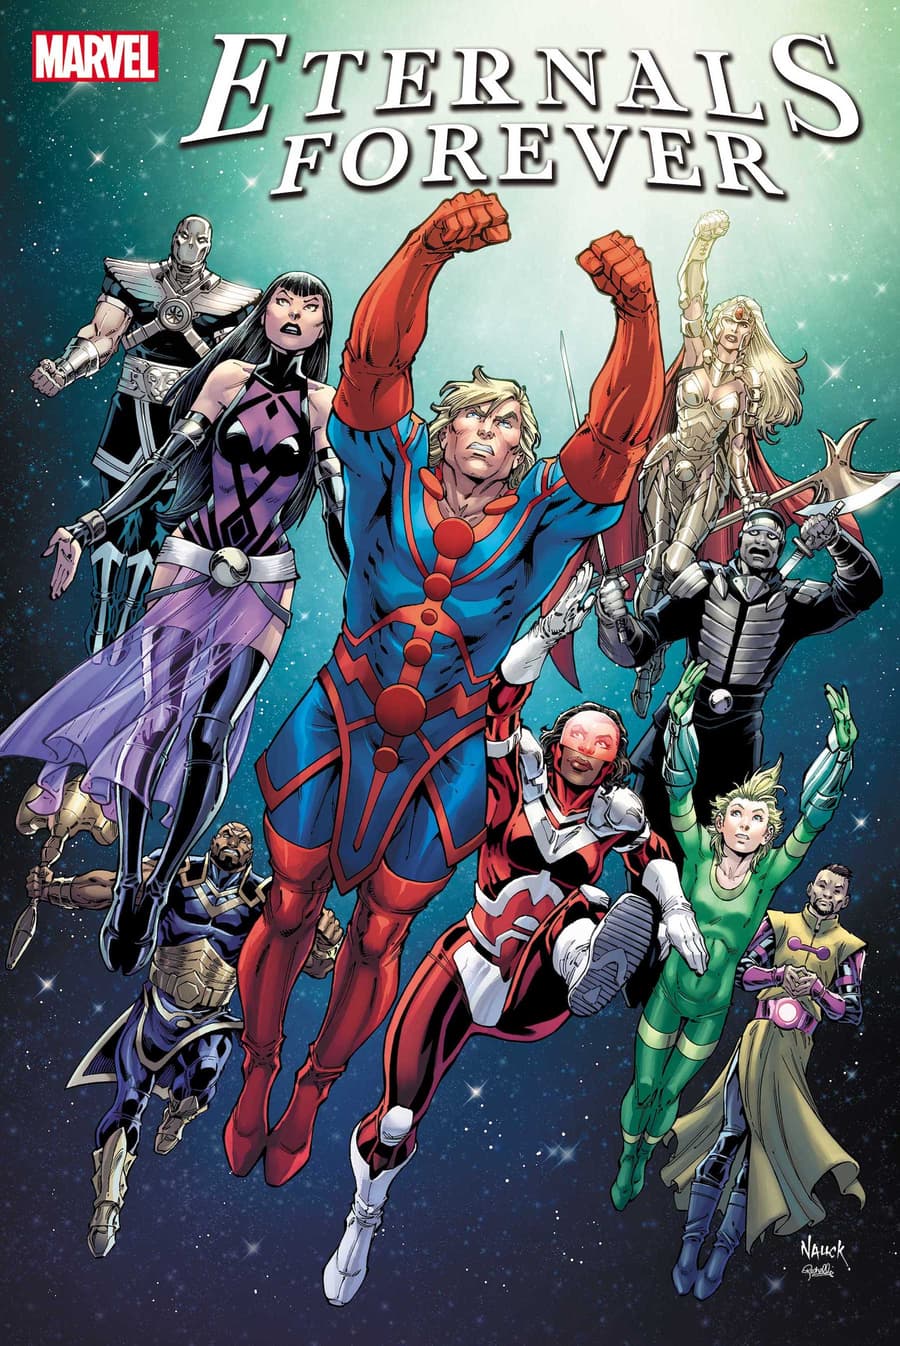 ETERNALS FOREVER #1 cover by Todd Nauck with colors by Rachelle Rosenberg